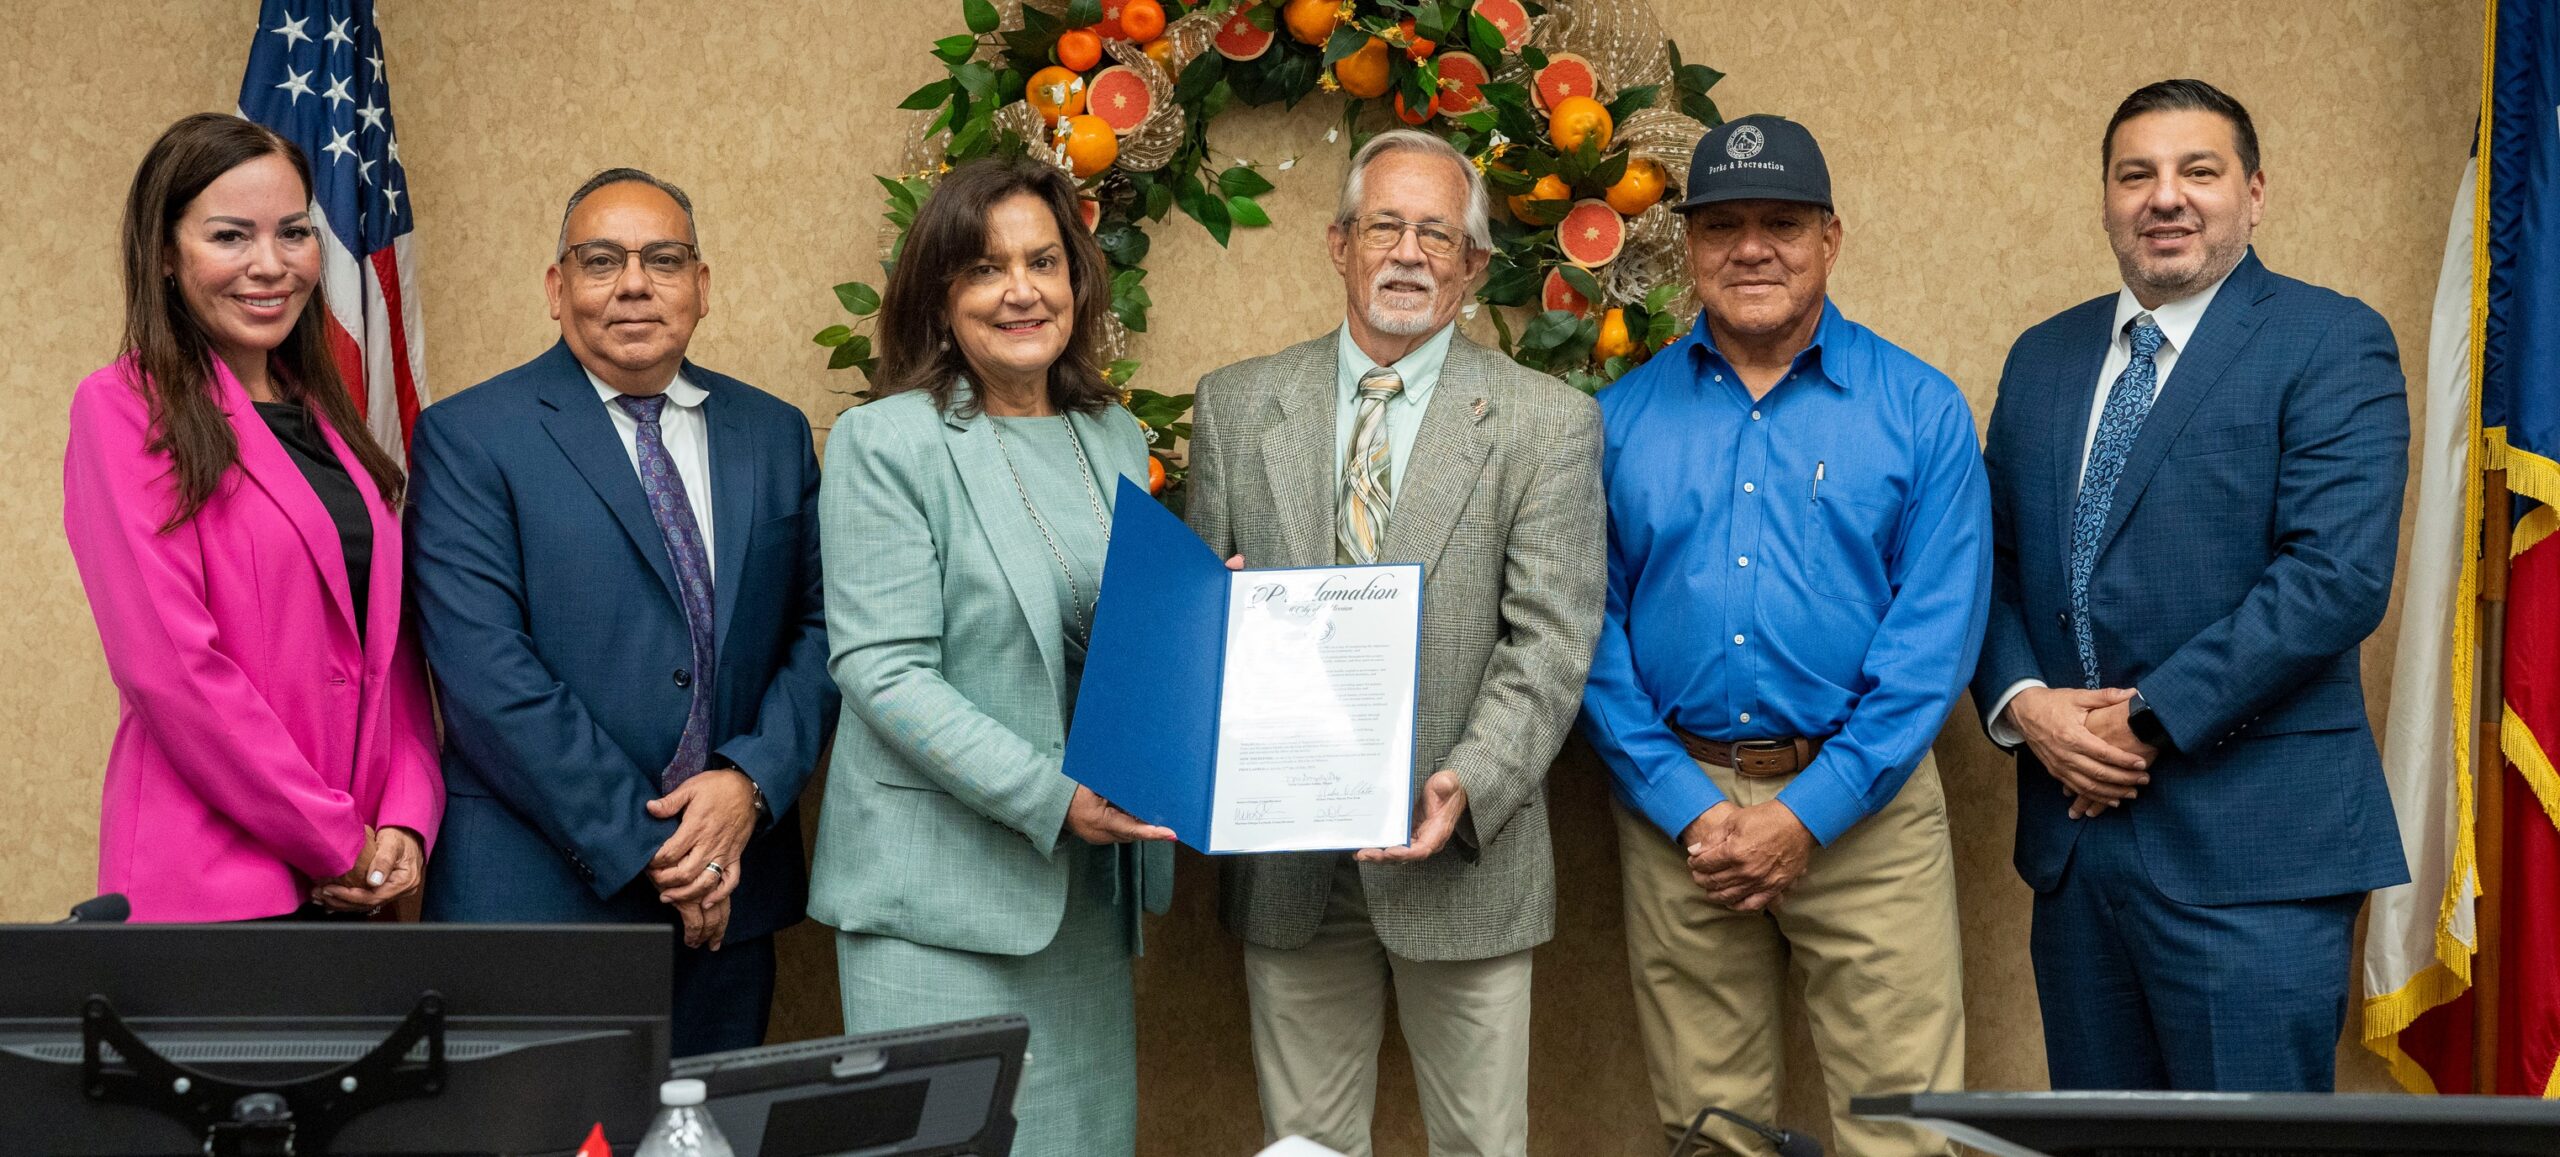 July Proclaimed as Parks and Recreation Month